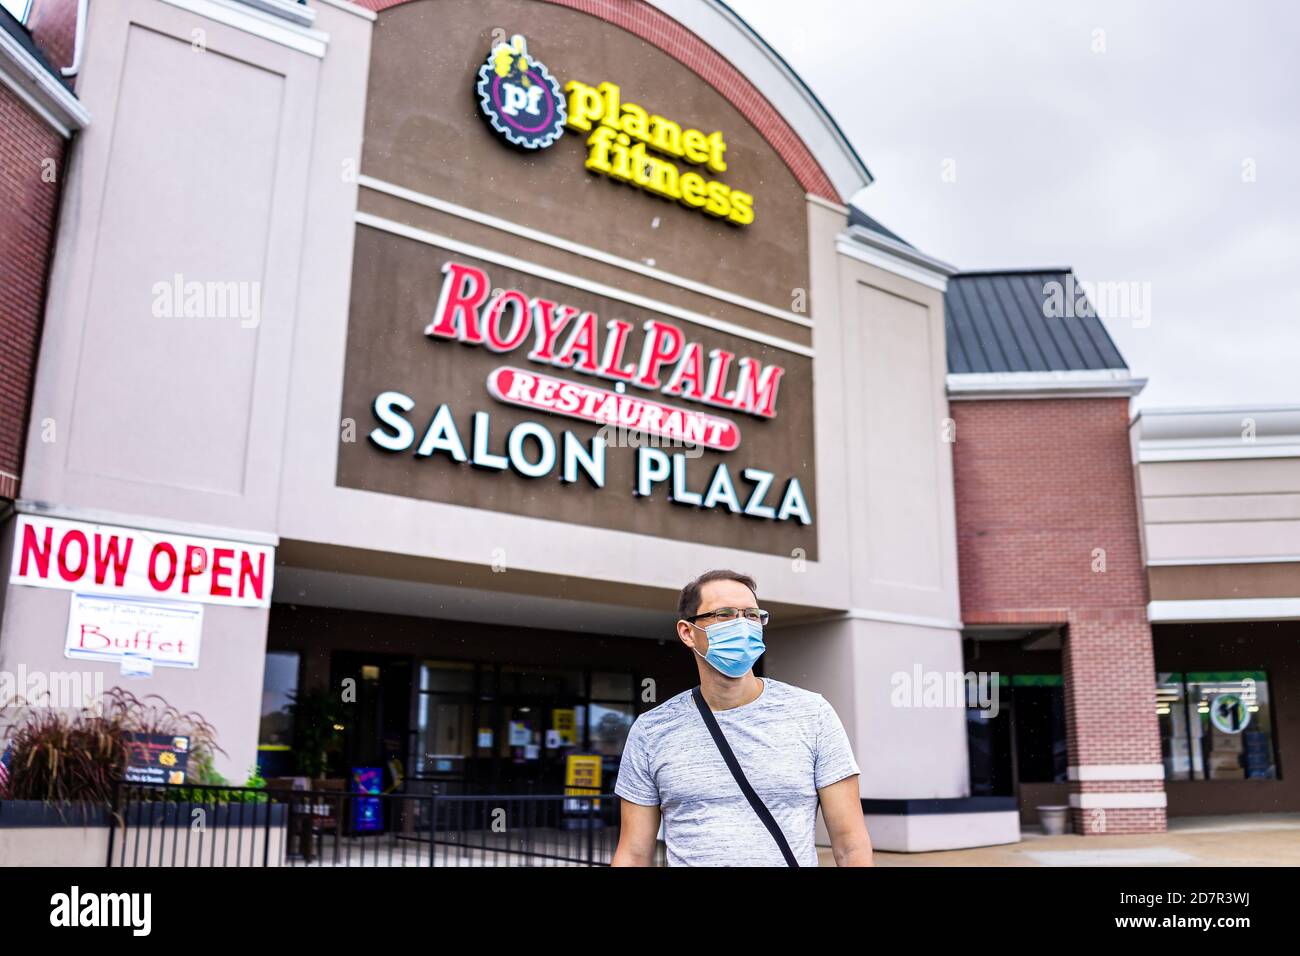 Sterling, USA - September 9, 2020: Stores at strip mall plaza with people man person in mask by planet fitness sign and now open during coronavirus in Stock Photo